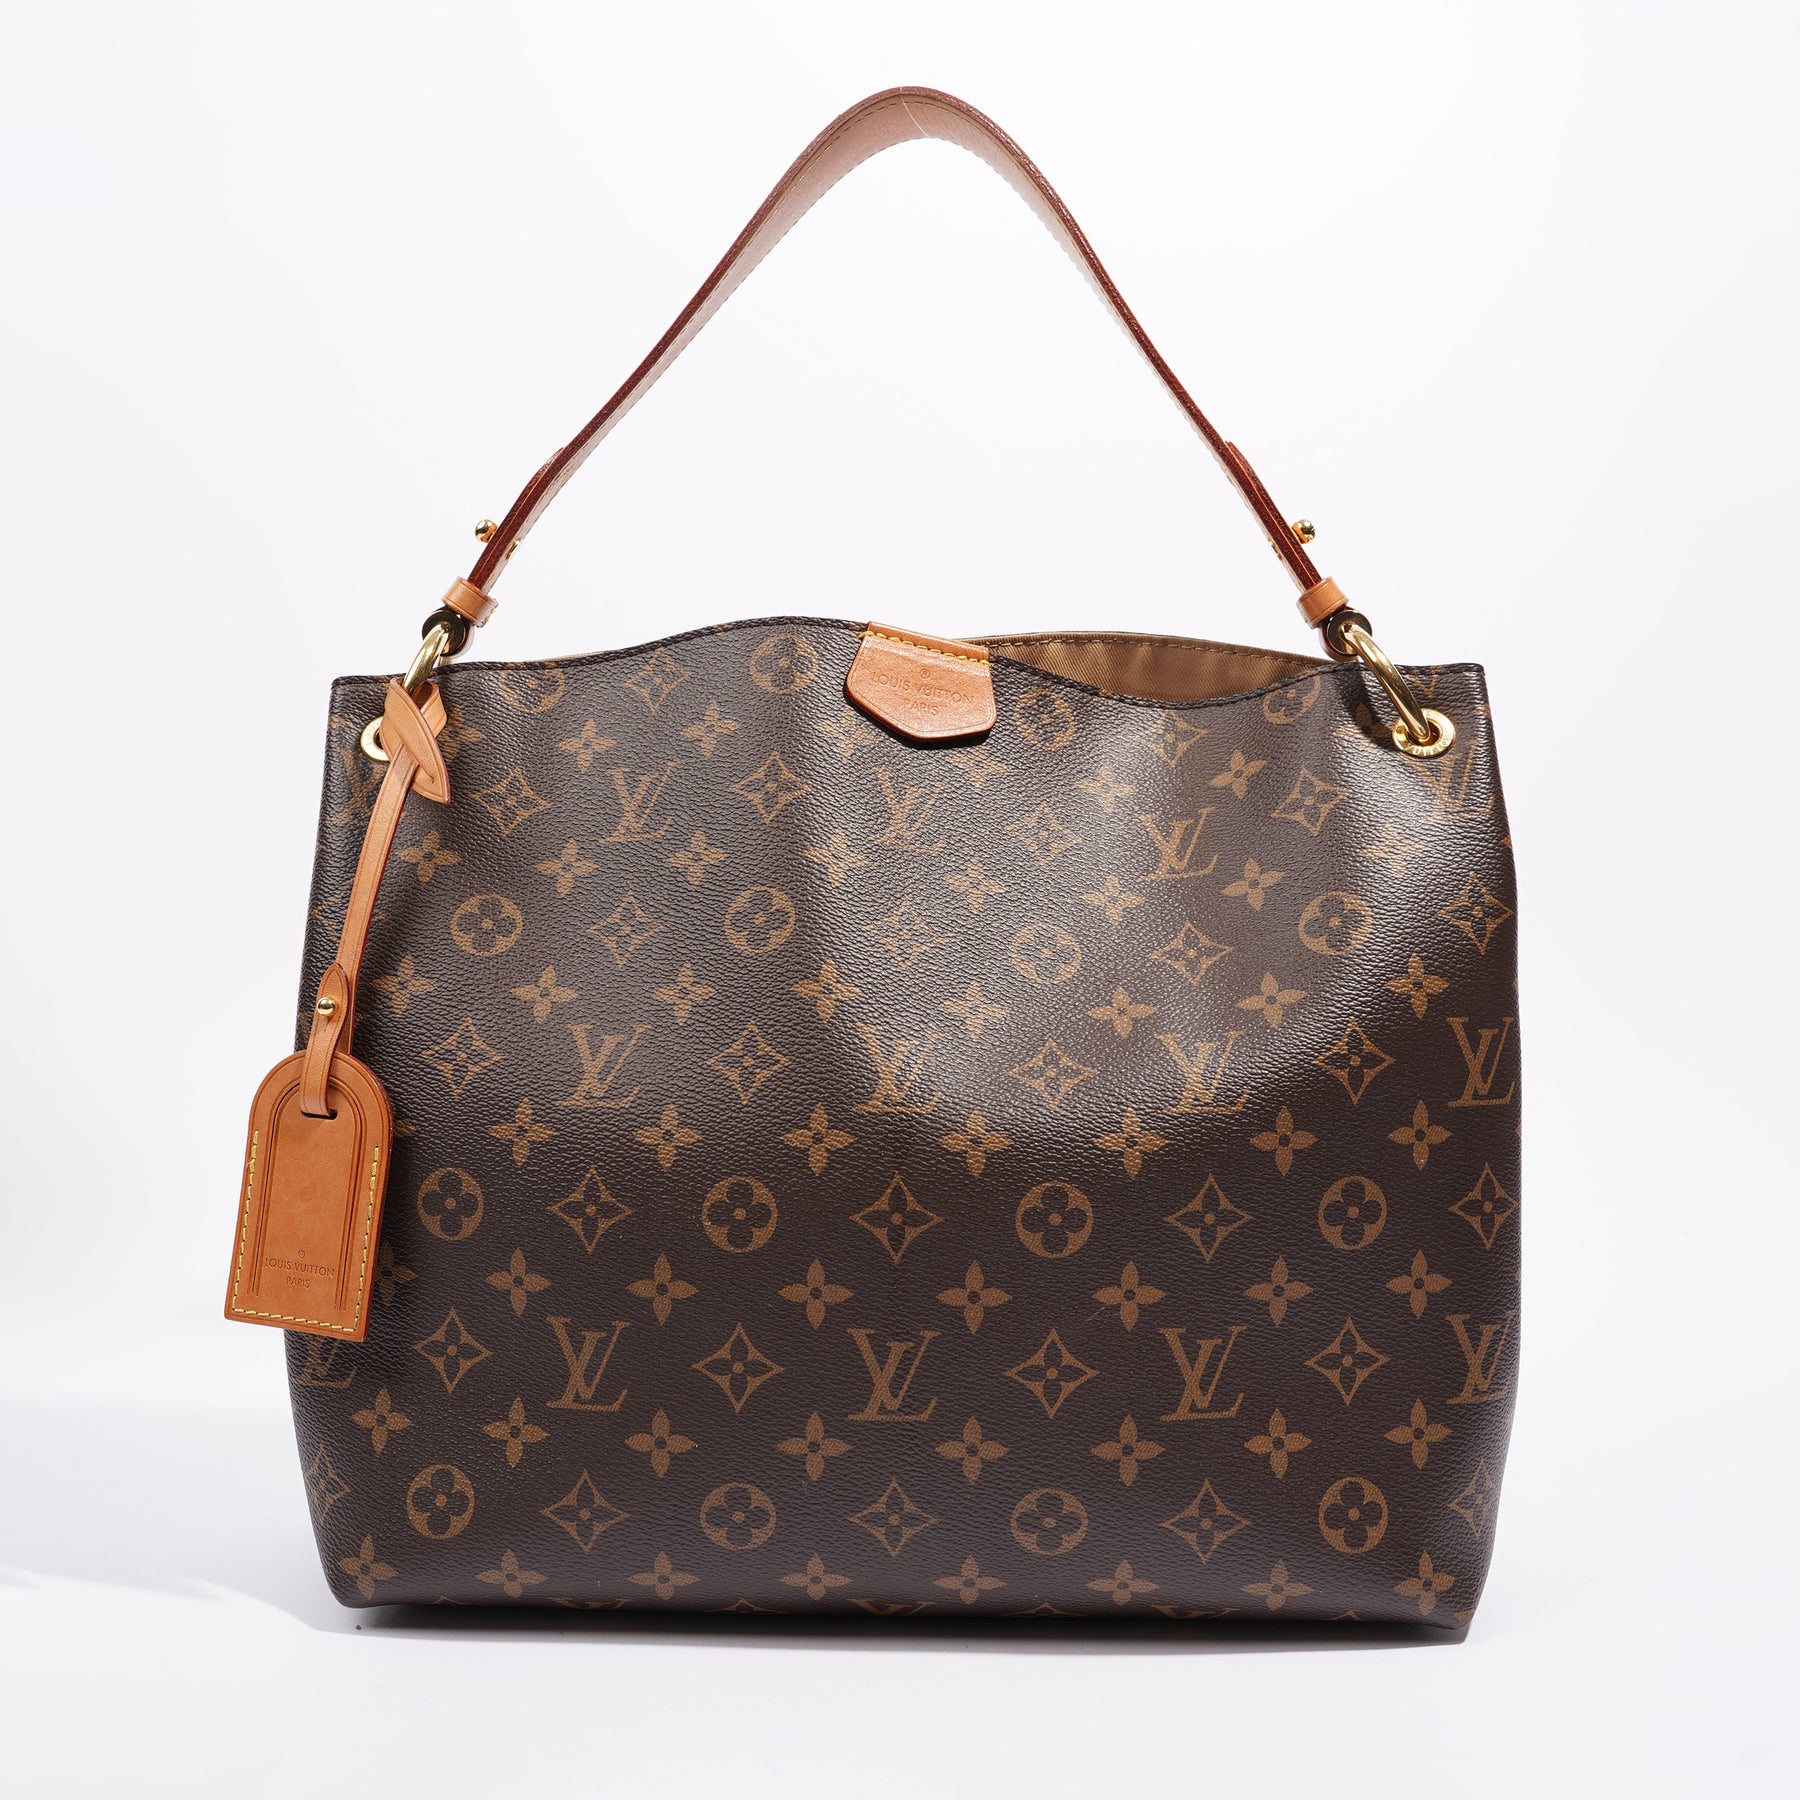 LV Graceful PM (Dust Bag) Dust Bag in Australia and USA